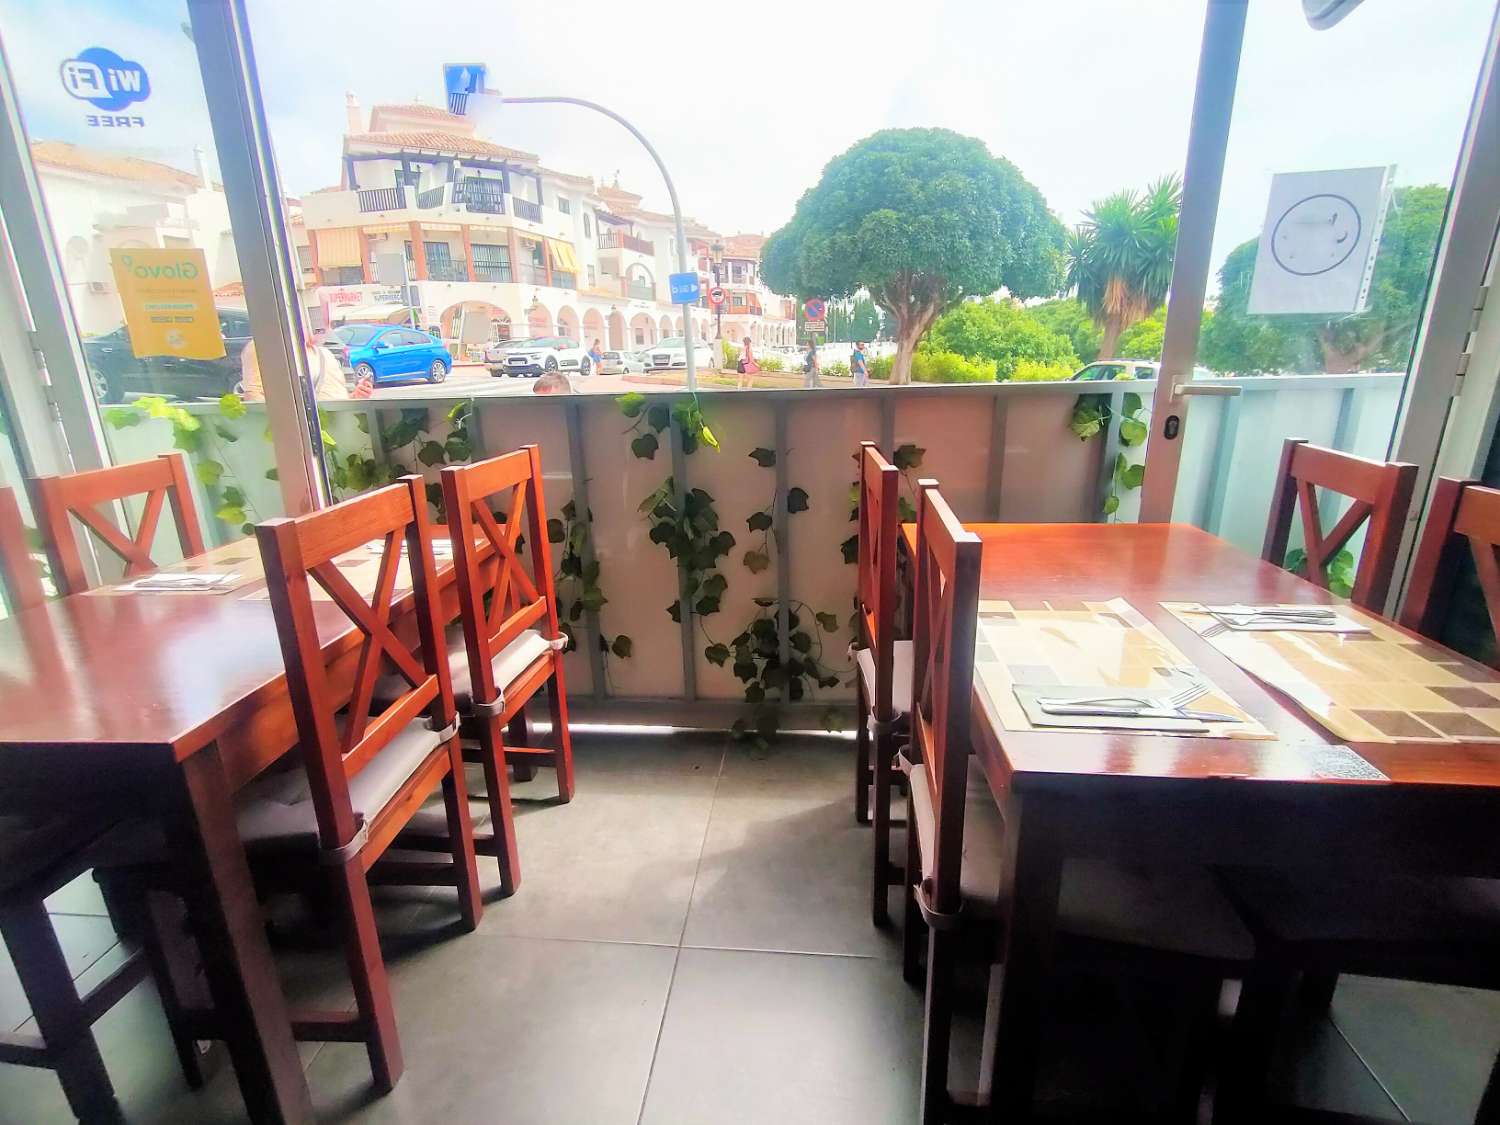 Bar & Restaurant in Benalmadena Costa del Sol - 50 meters from the beach - Excellent location